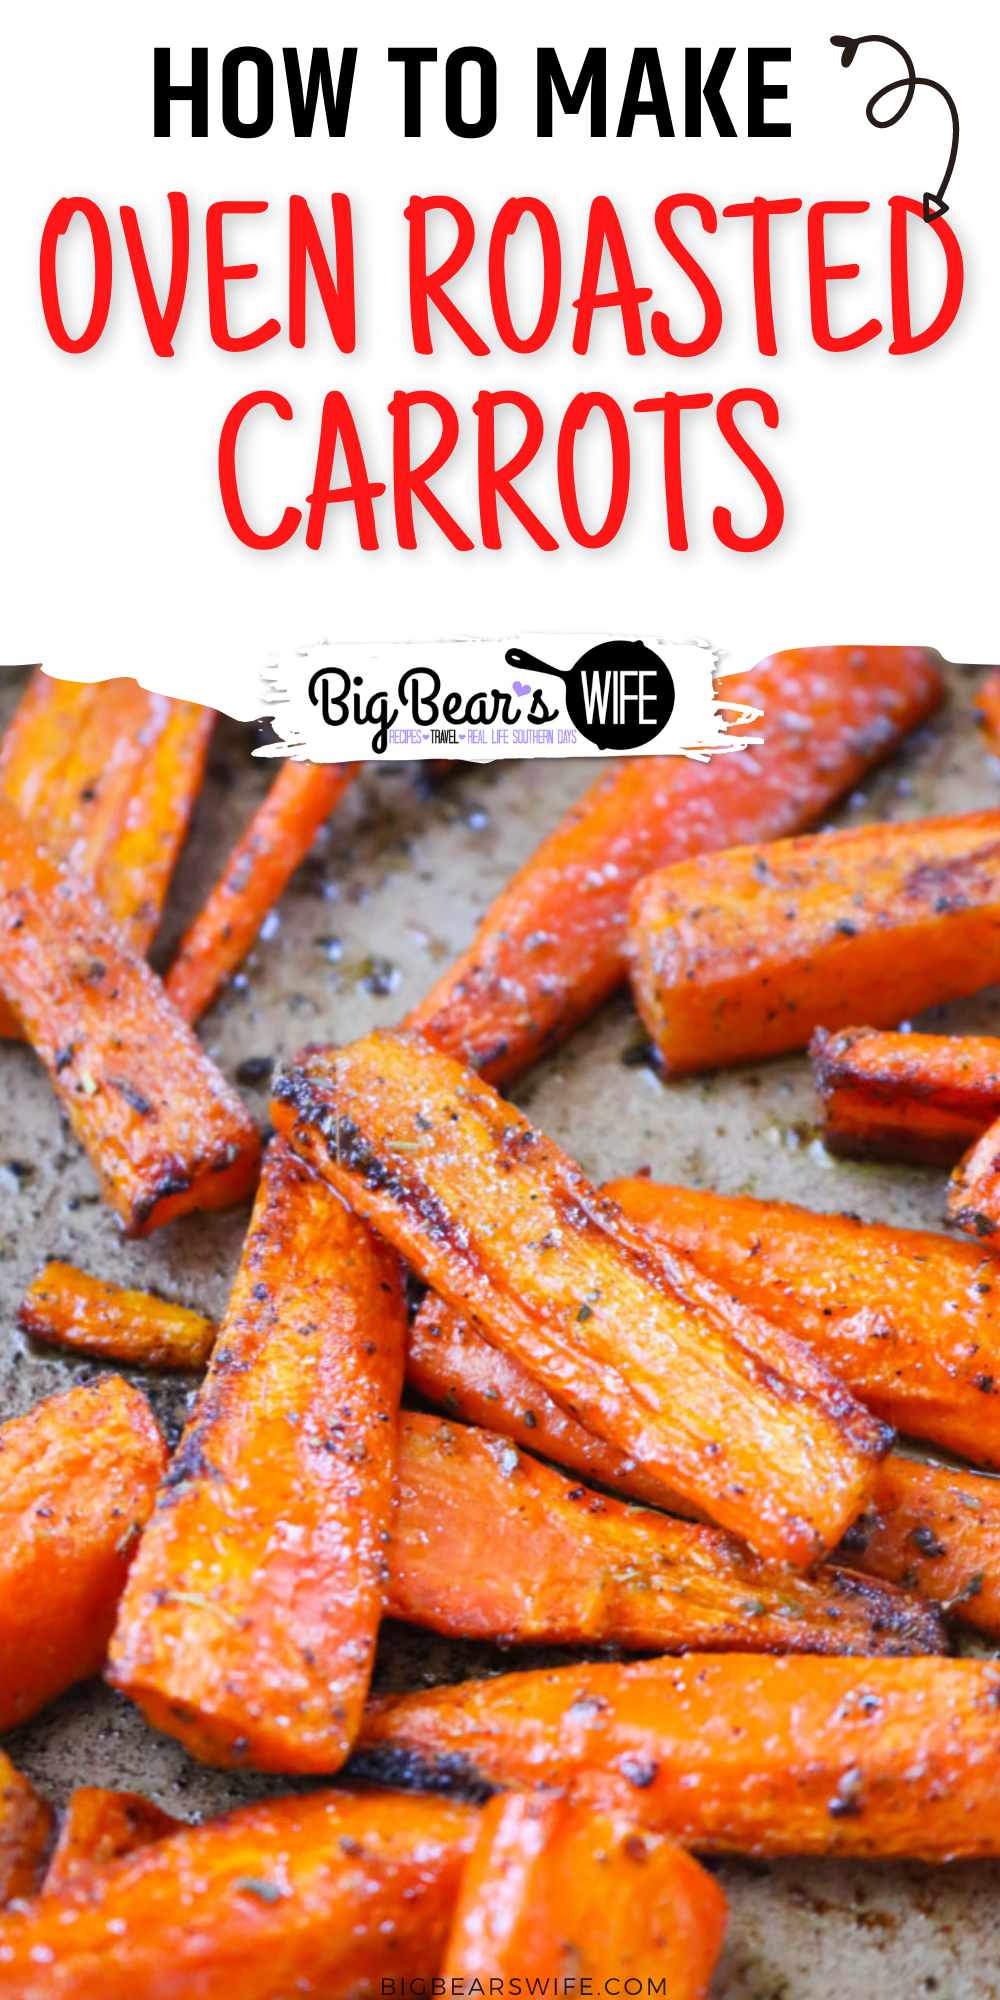  Oven Roasted Carrots make a great side dish that pairs perfect with almost any main course! These cooked carrots are oven roasted with a few seasonings and can be customized to use your favorites from the spice drawer! Ready in under 45 minutes and perfect for weeknights, weekends and meal prep!  via @bigbearswife